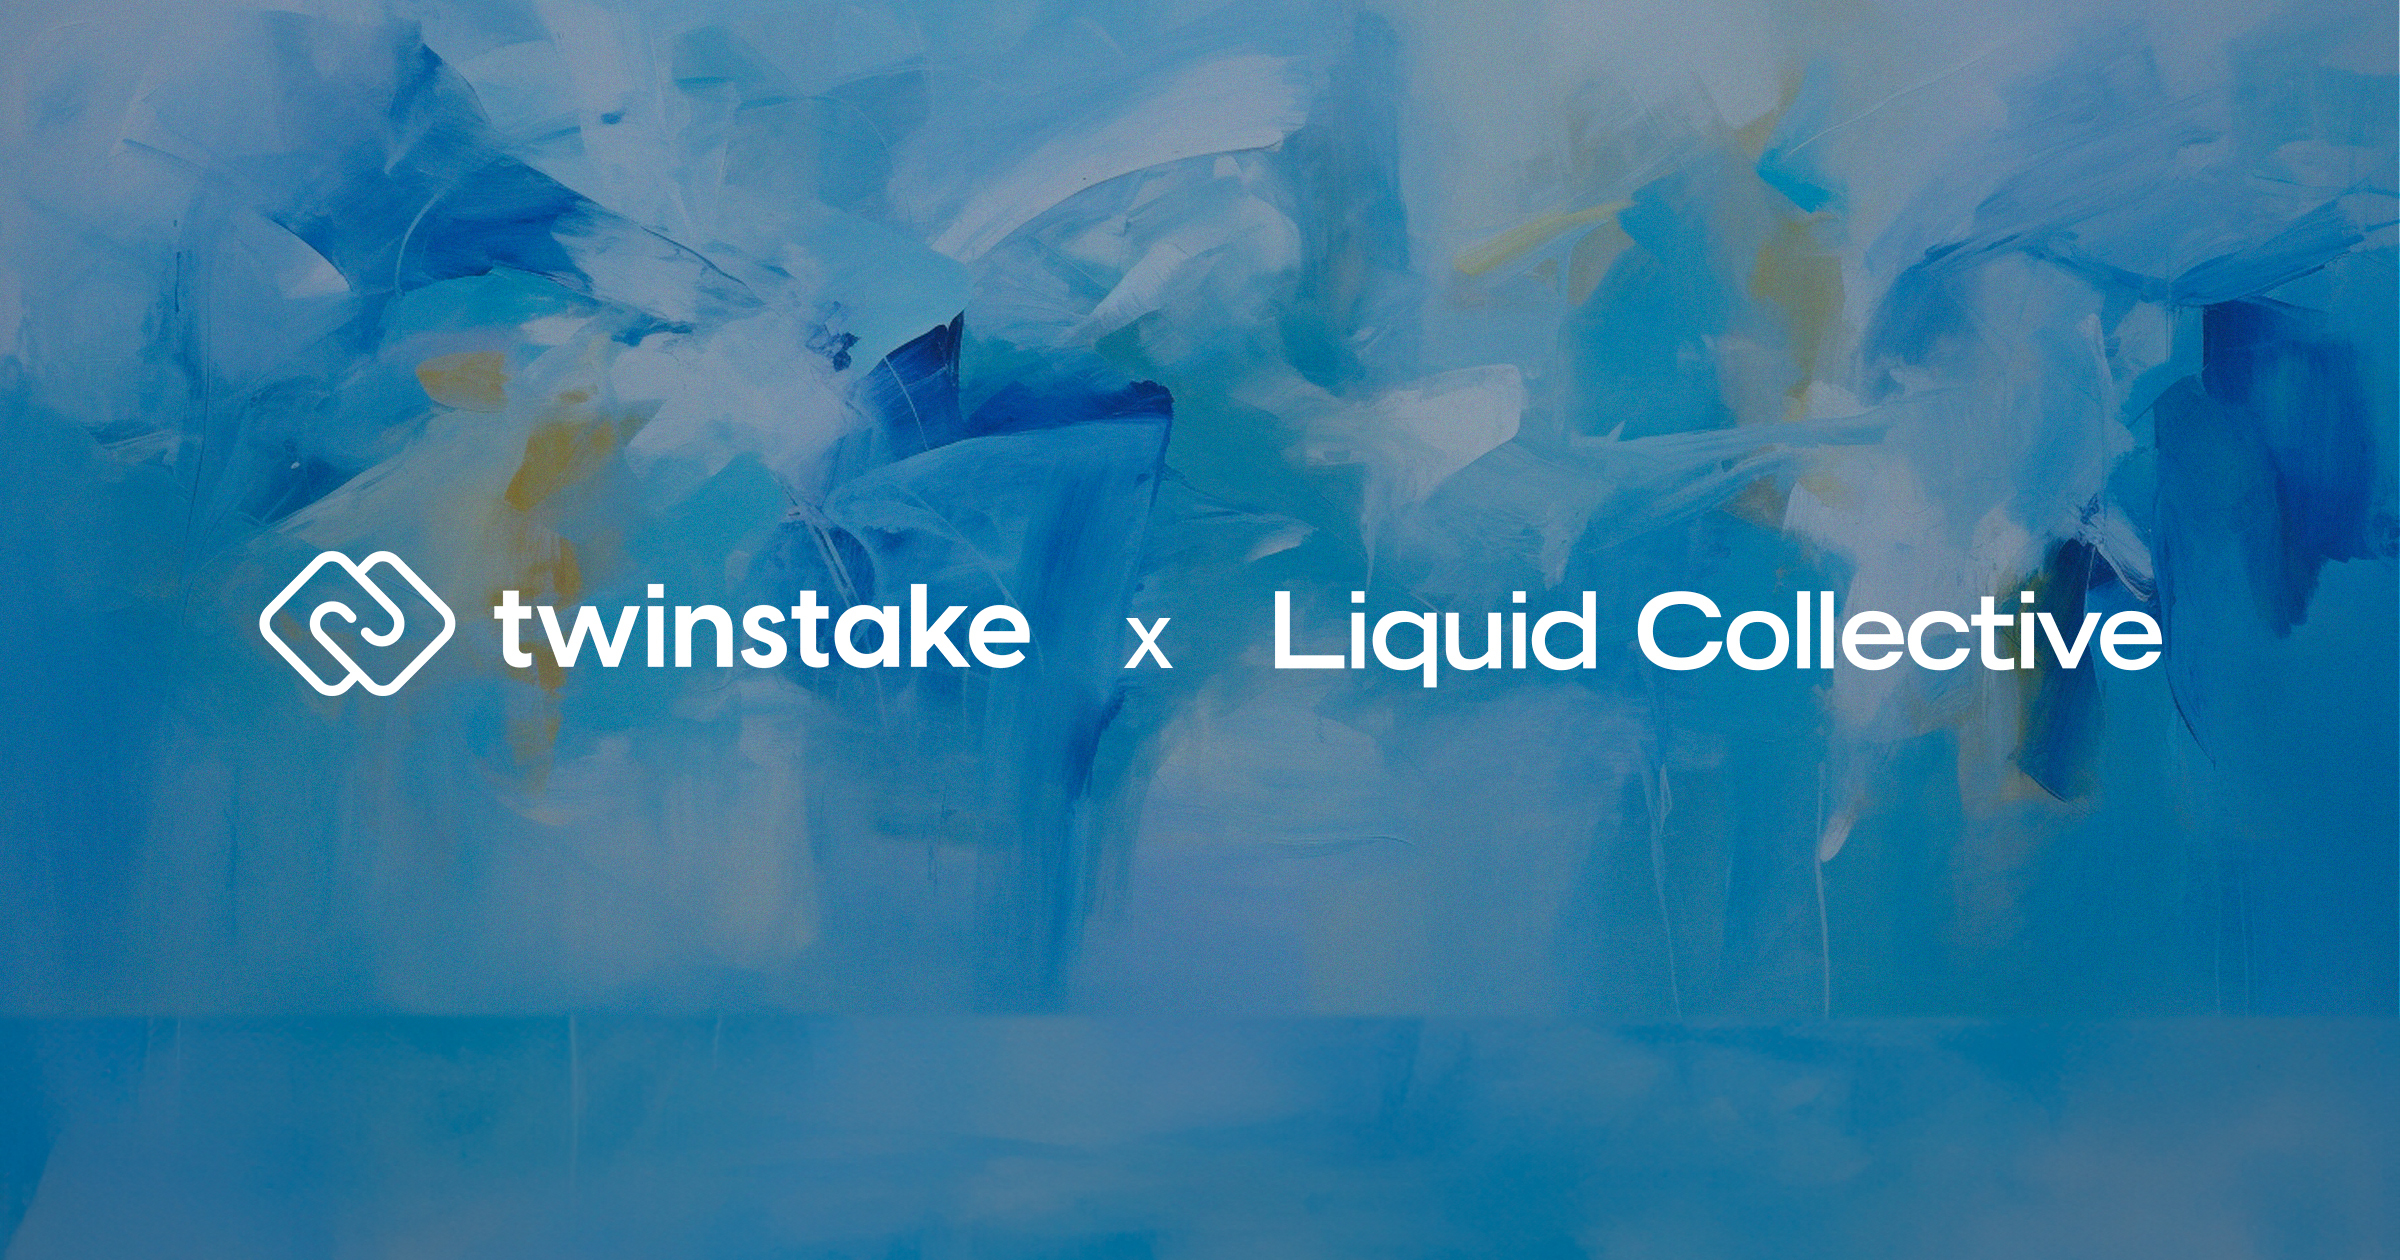 Twinstake joins Liquid Collective as Platform to offer institutional liquid staking